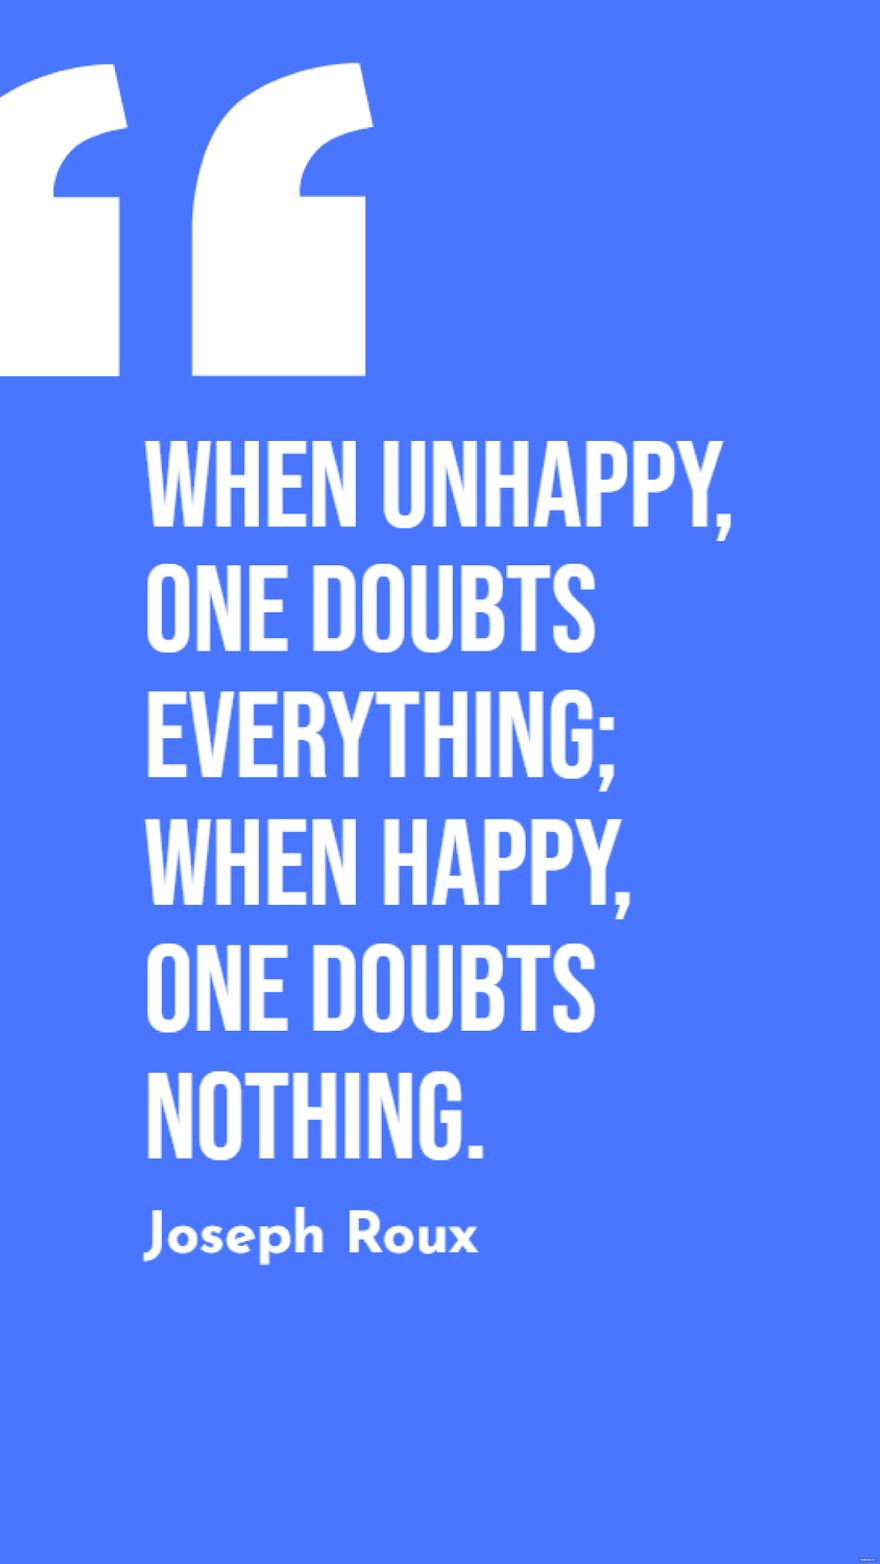 Joseph Roux - When unhappy, one doubts everything; when happy, one doubts nothing.